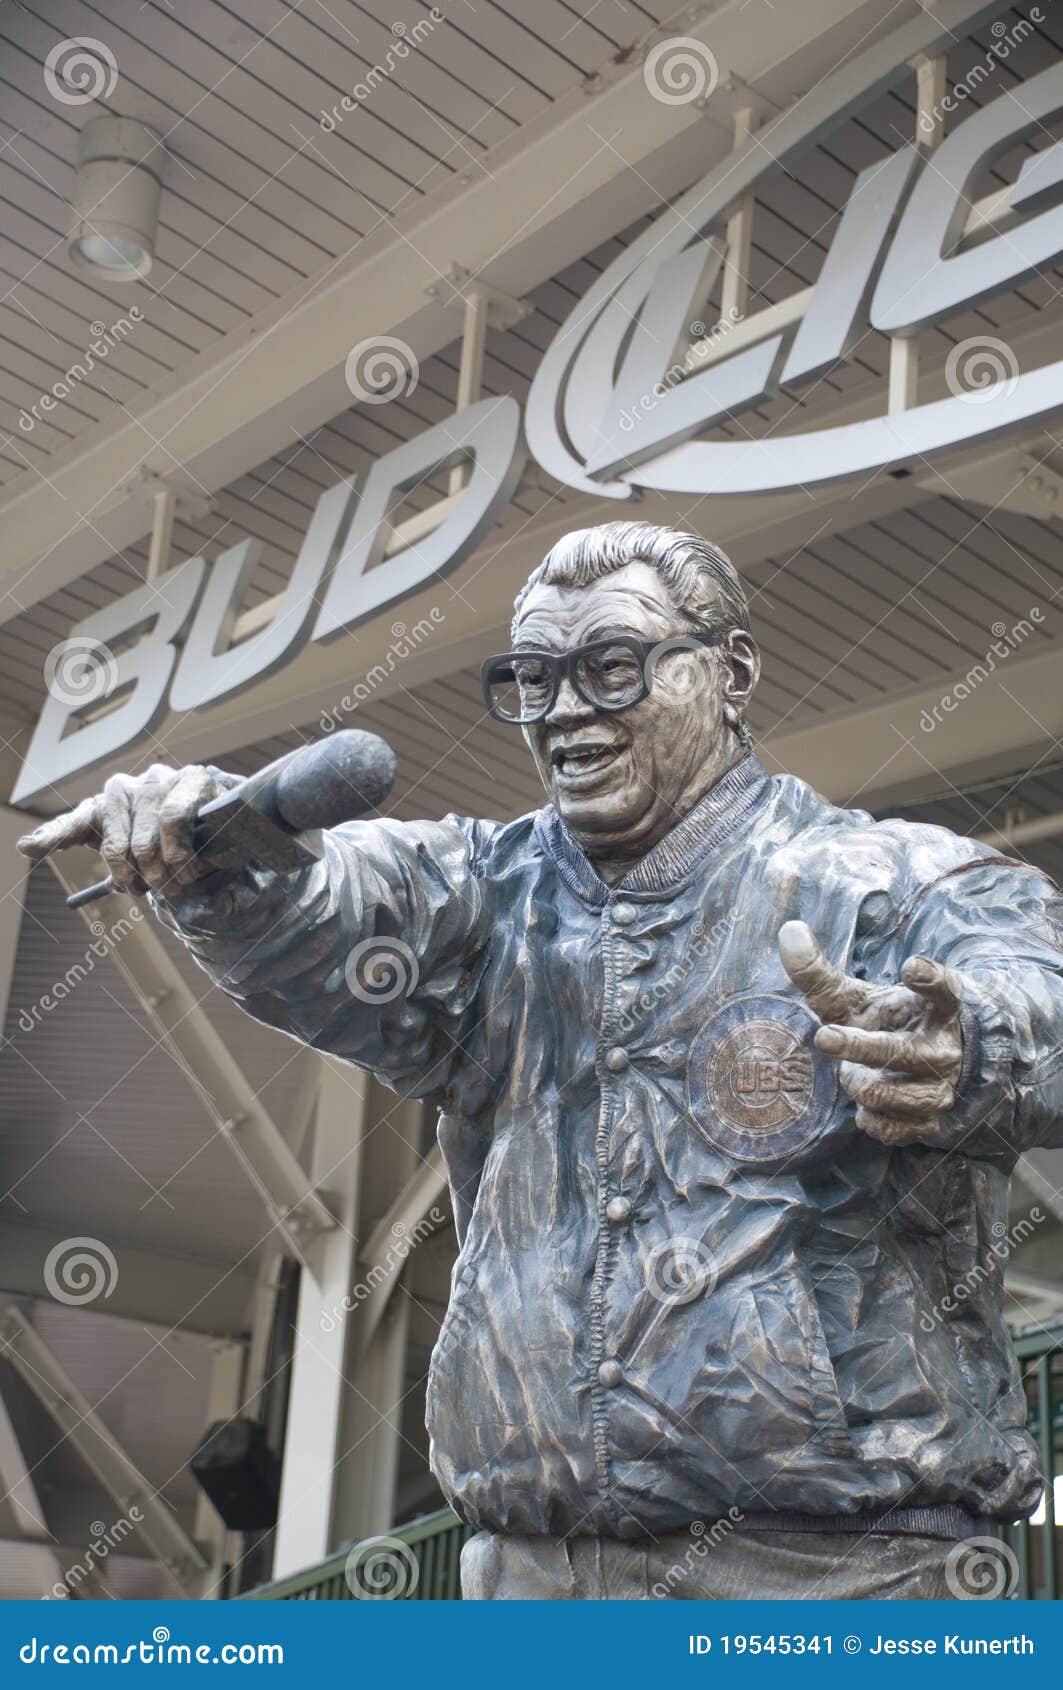 Harry Caray Statue editorial photo. Image of glasses - 19545341